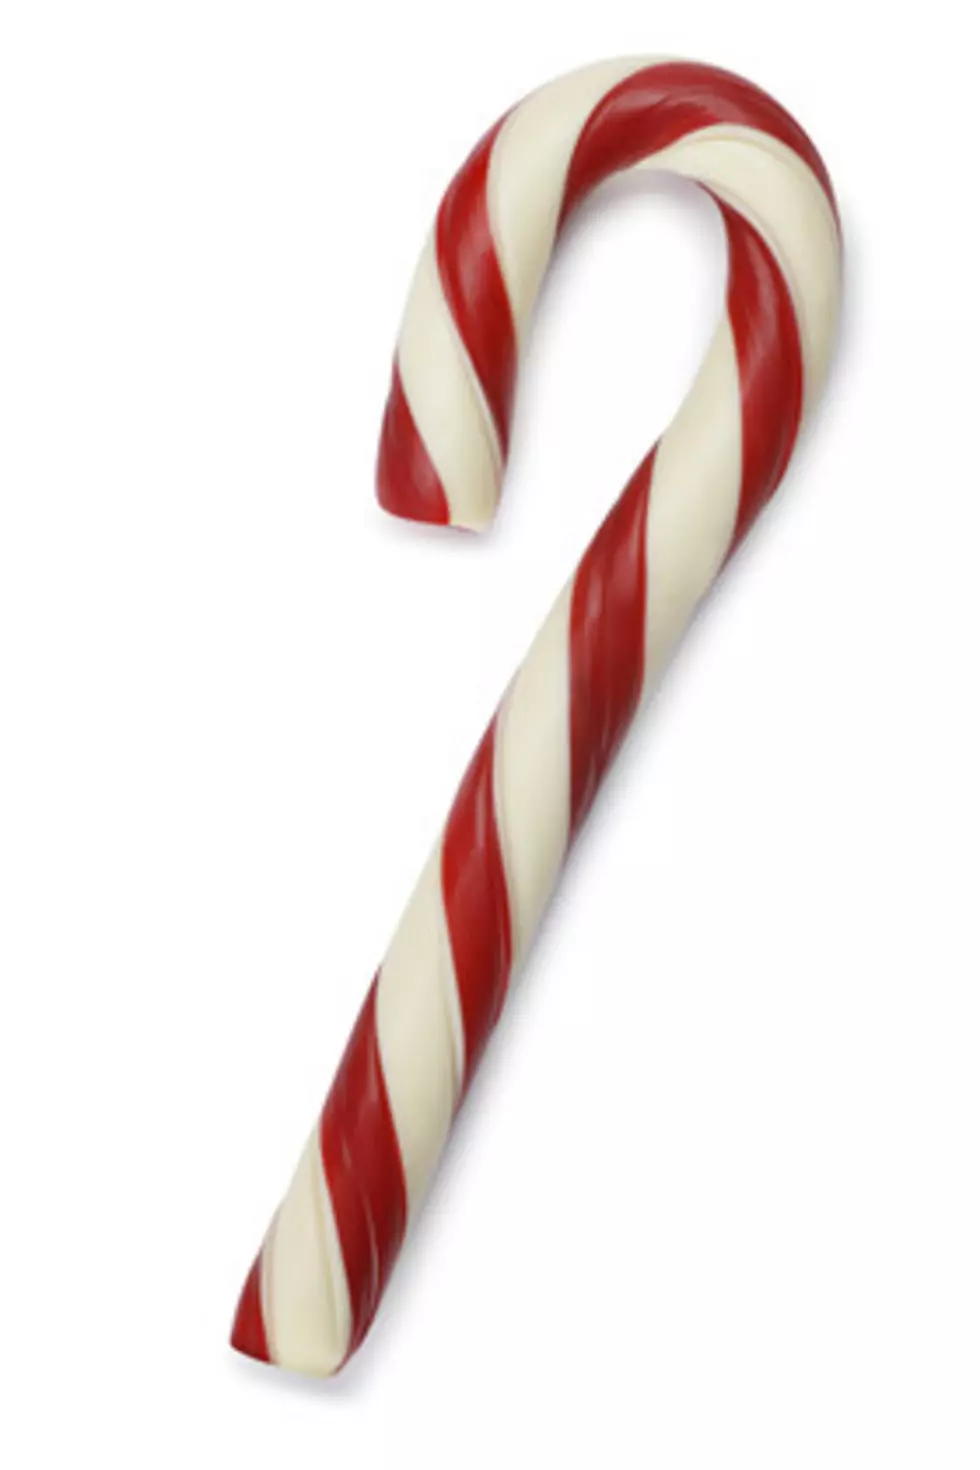 Who Invented The Candy Cane? The Popular Christmas Treat Has Its Origins As  Far Back As The 1600's